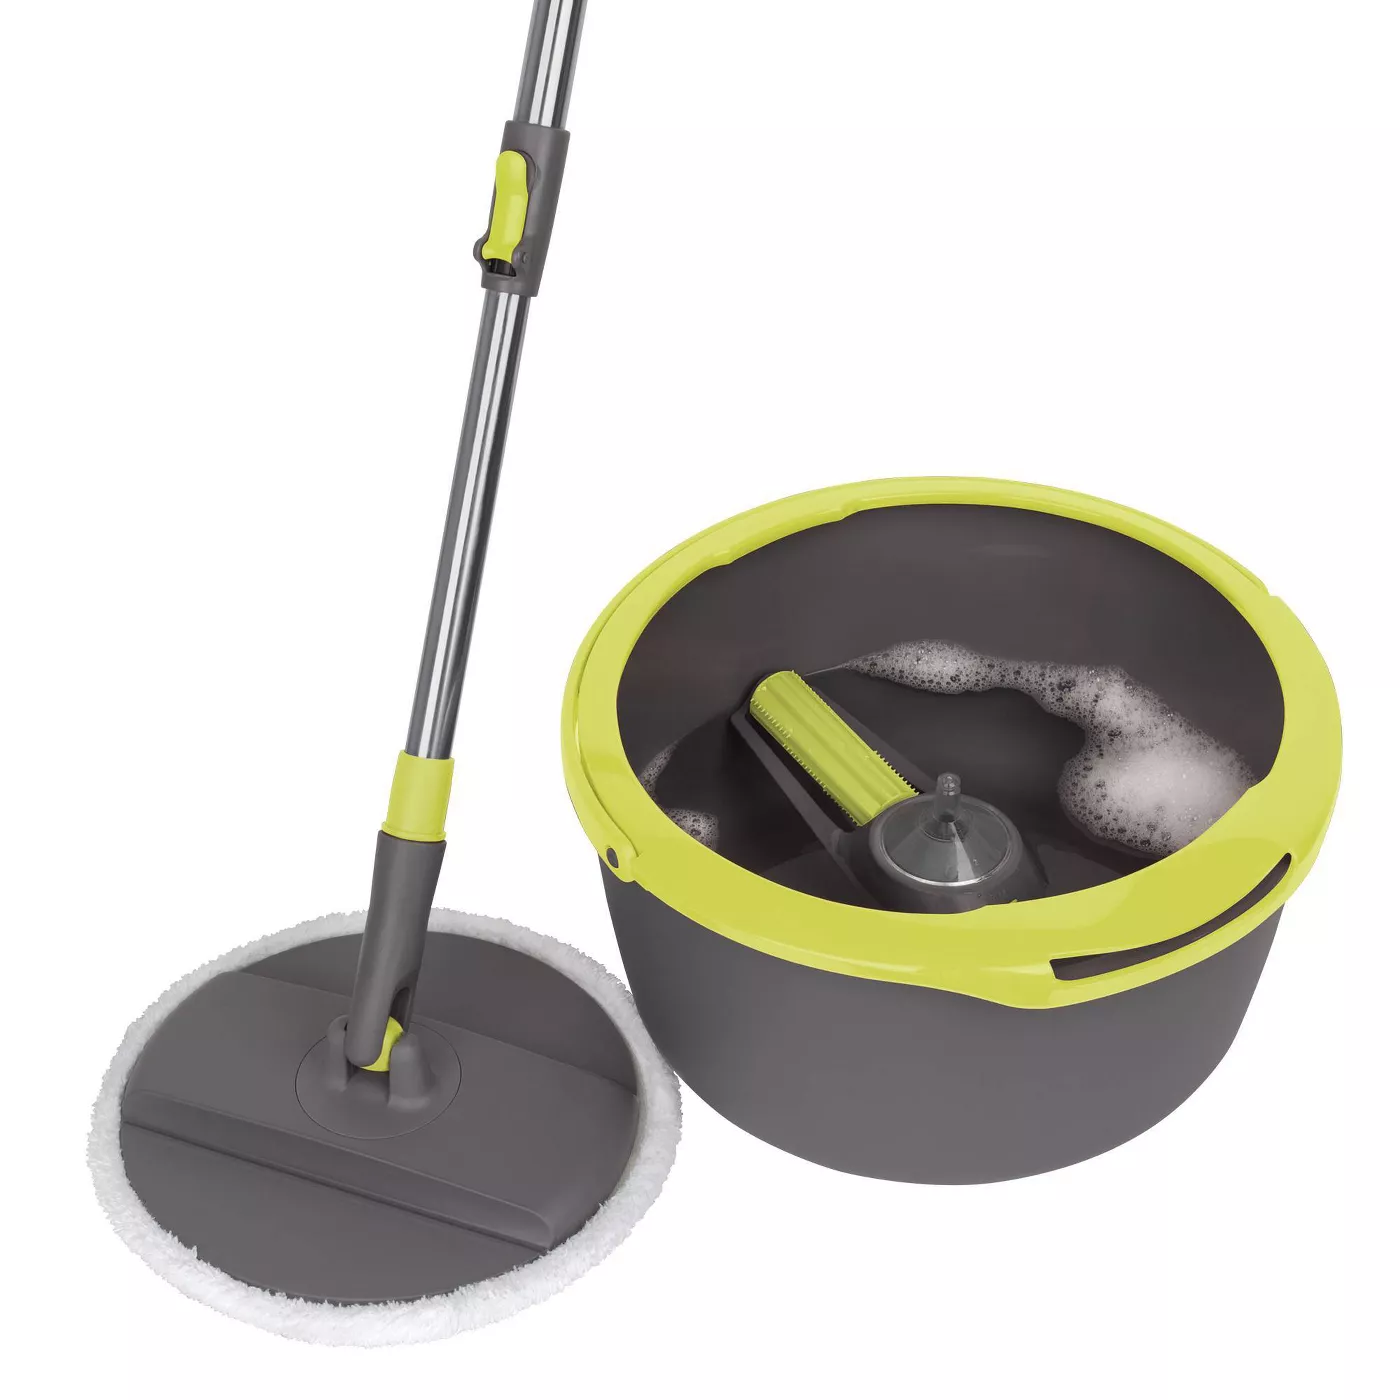 Wayclean Compact Spin Cycle Mop & Refill - image 1 of 9